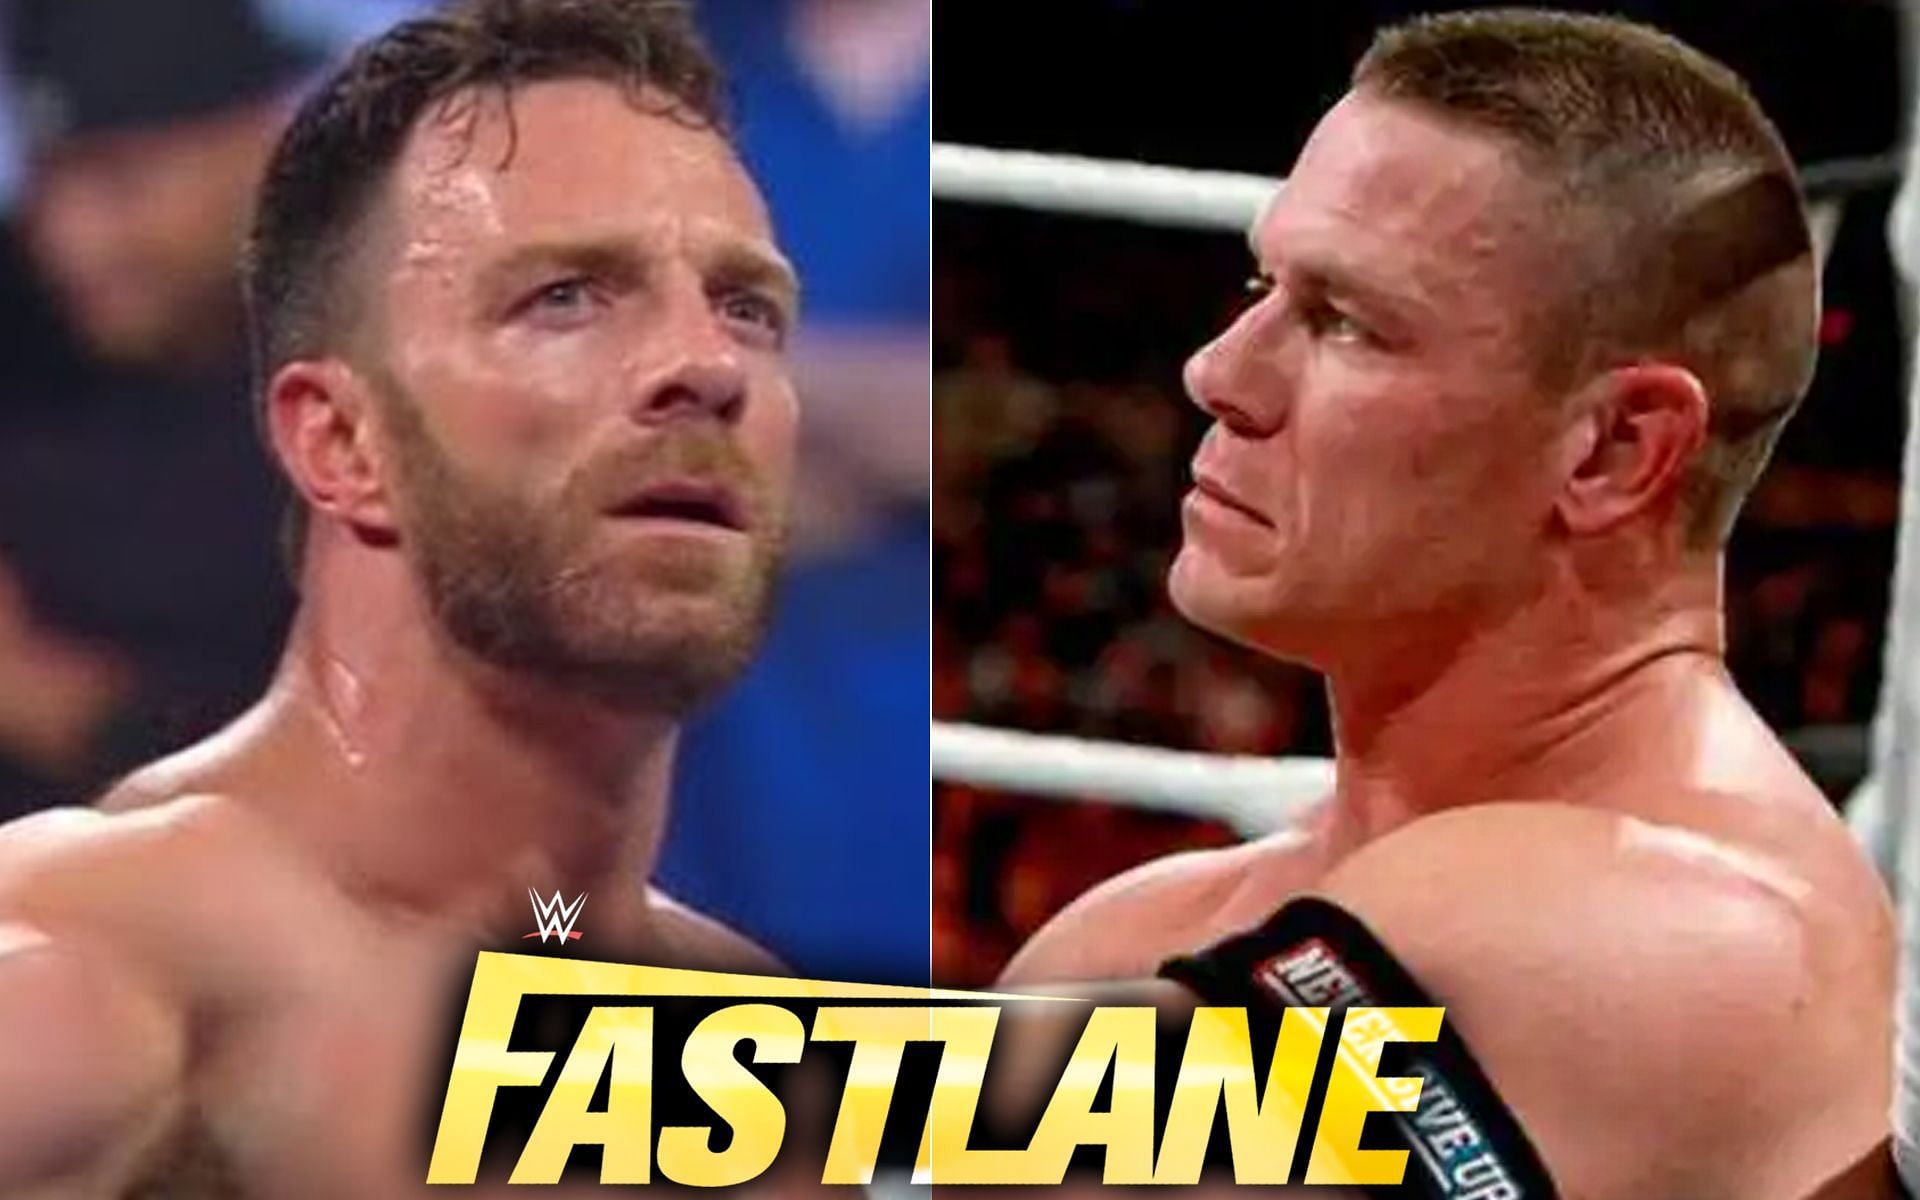 Will the Bloodline manages to defeat John Cena and LA Knight at Fastlane?